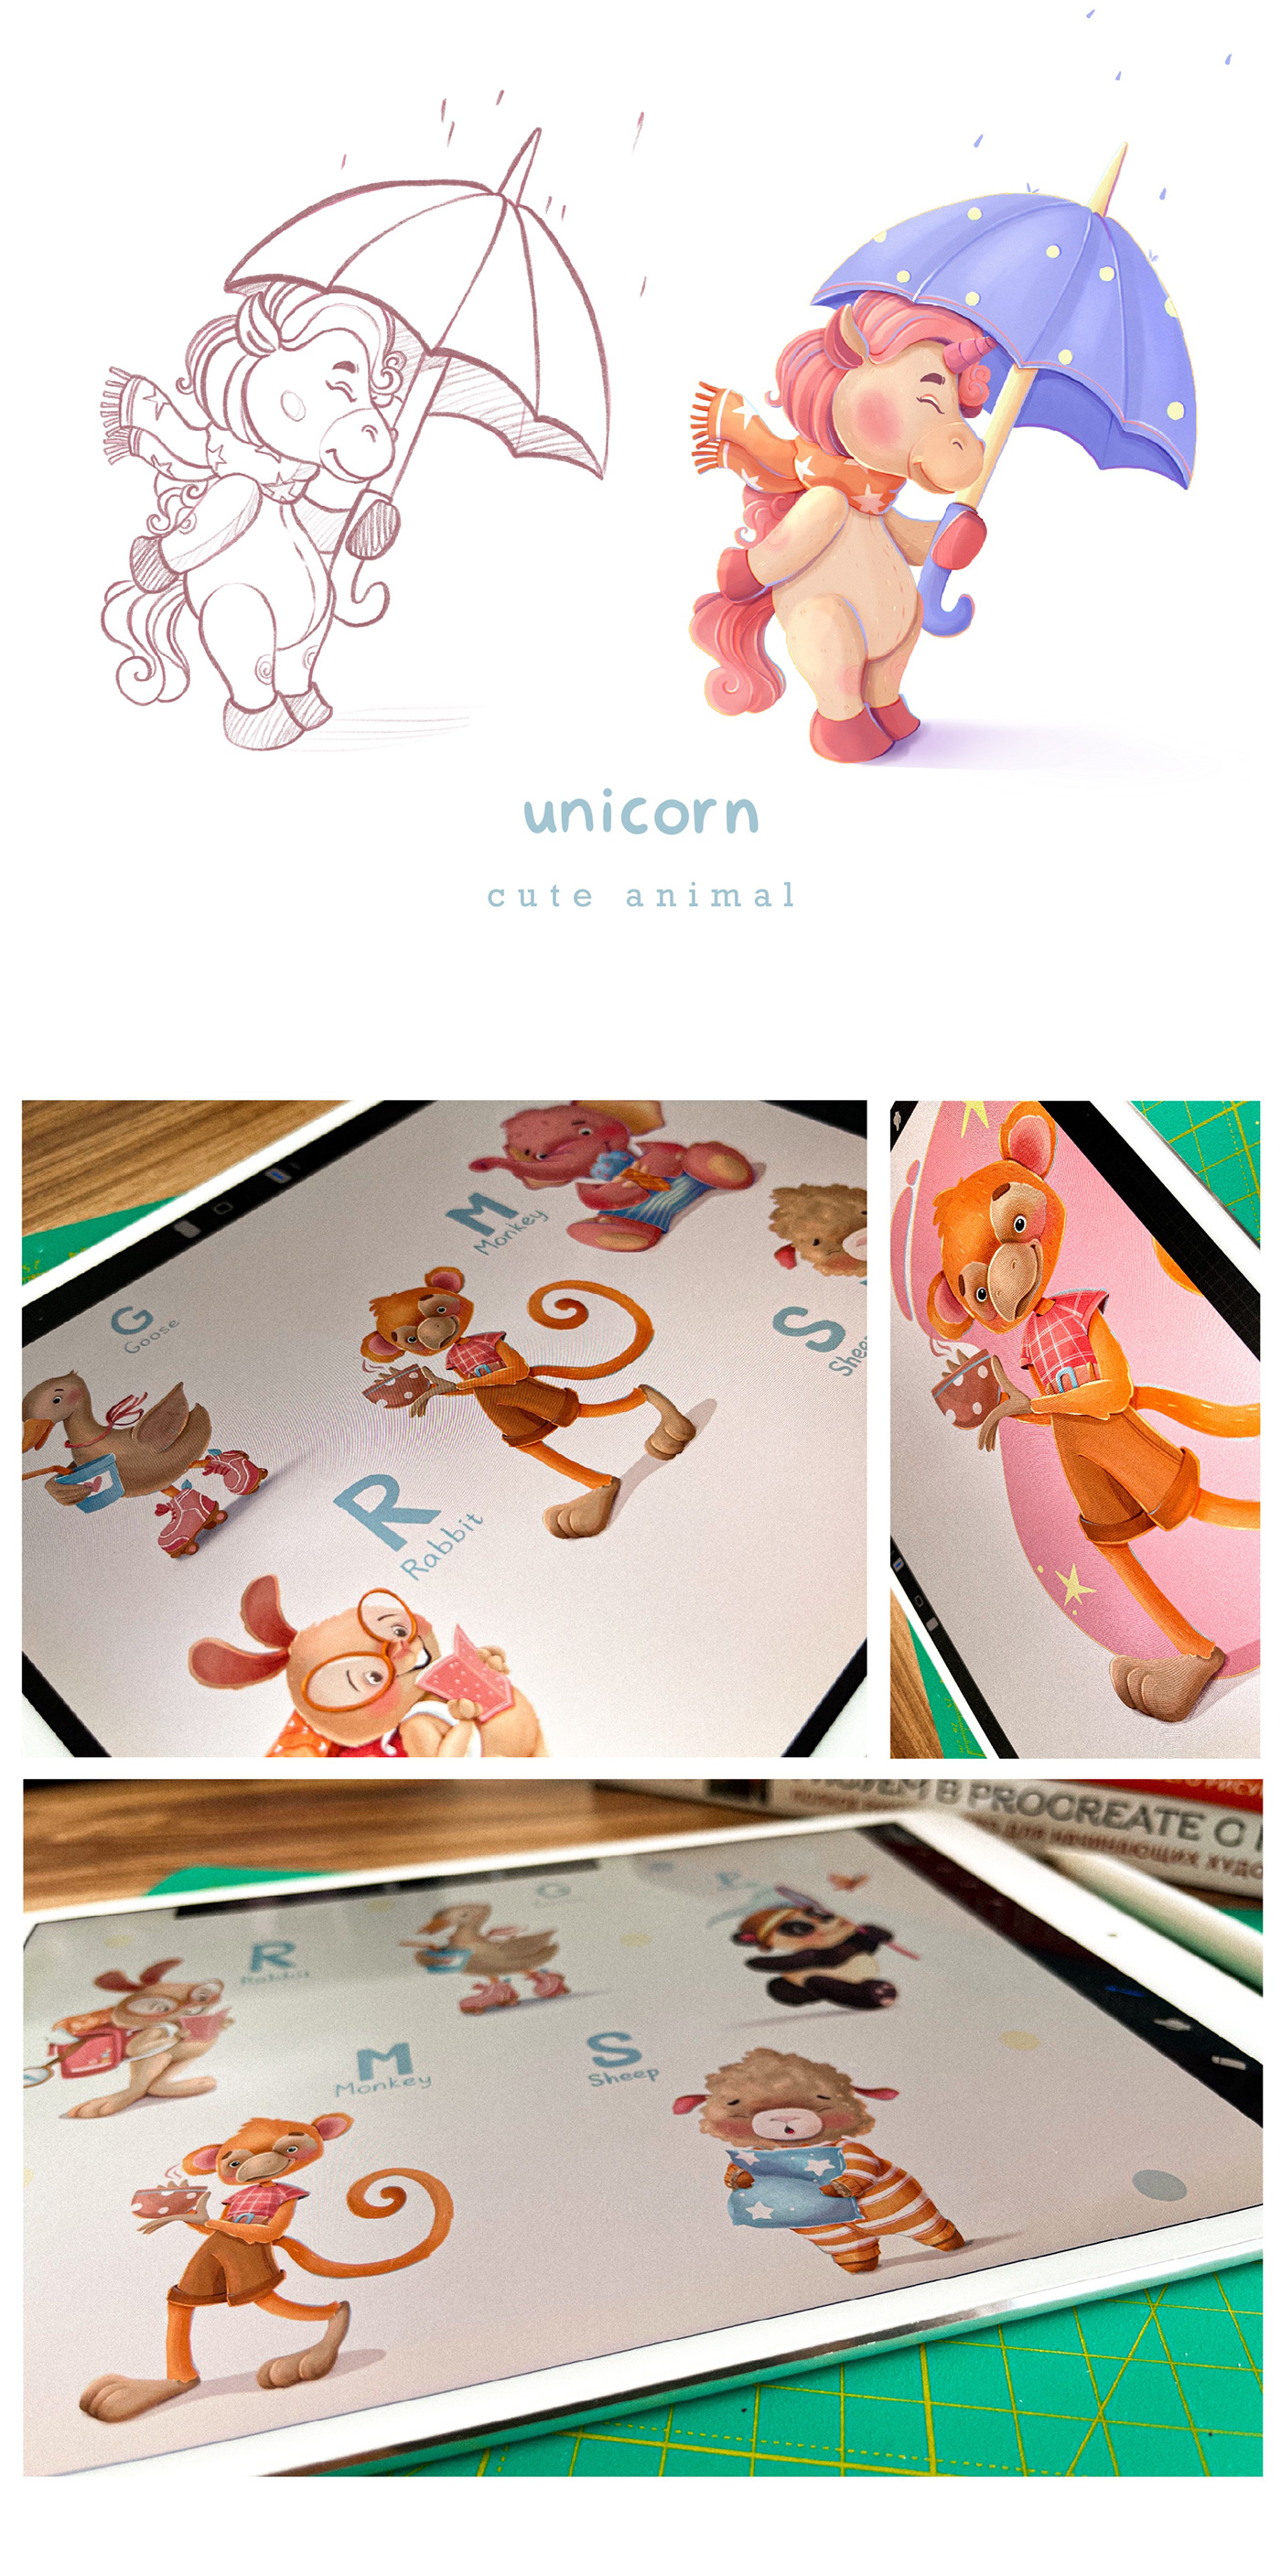 Character Character design  cartoon animals cute animals kids illustration Picture book children illustration characters kidsillustration